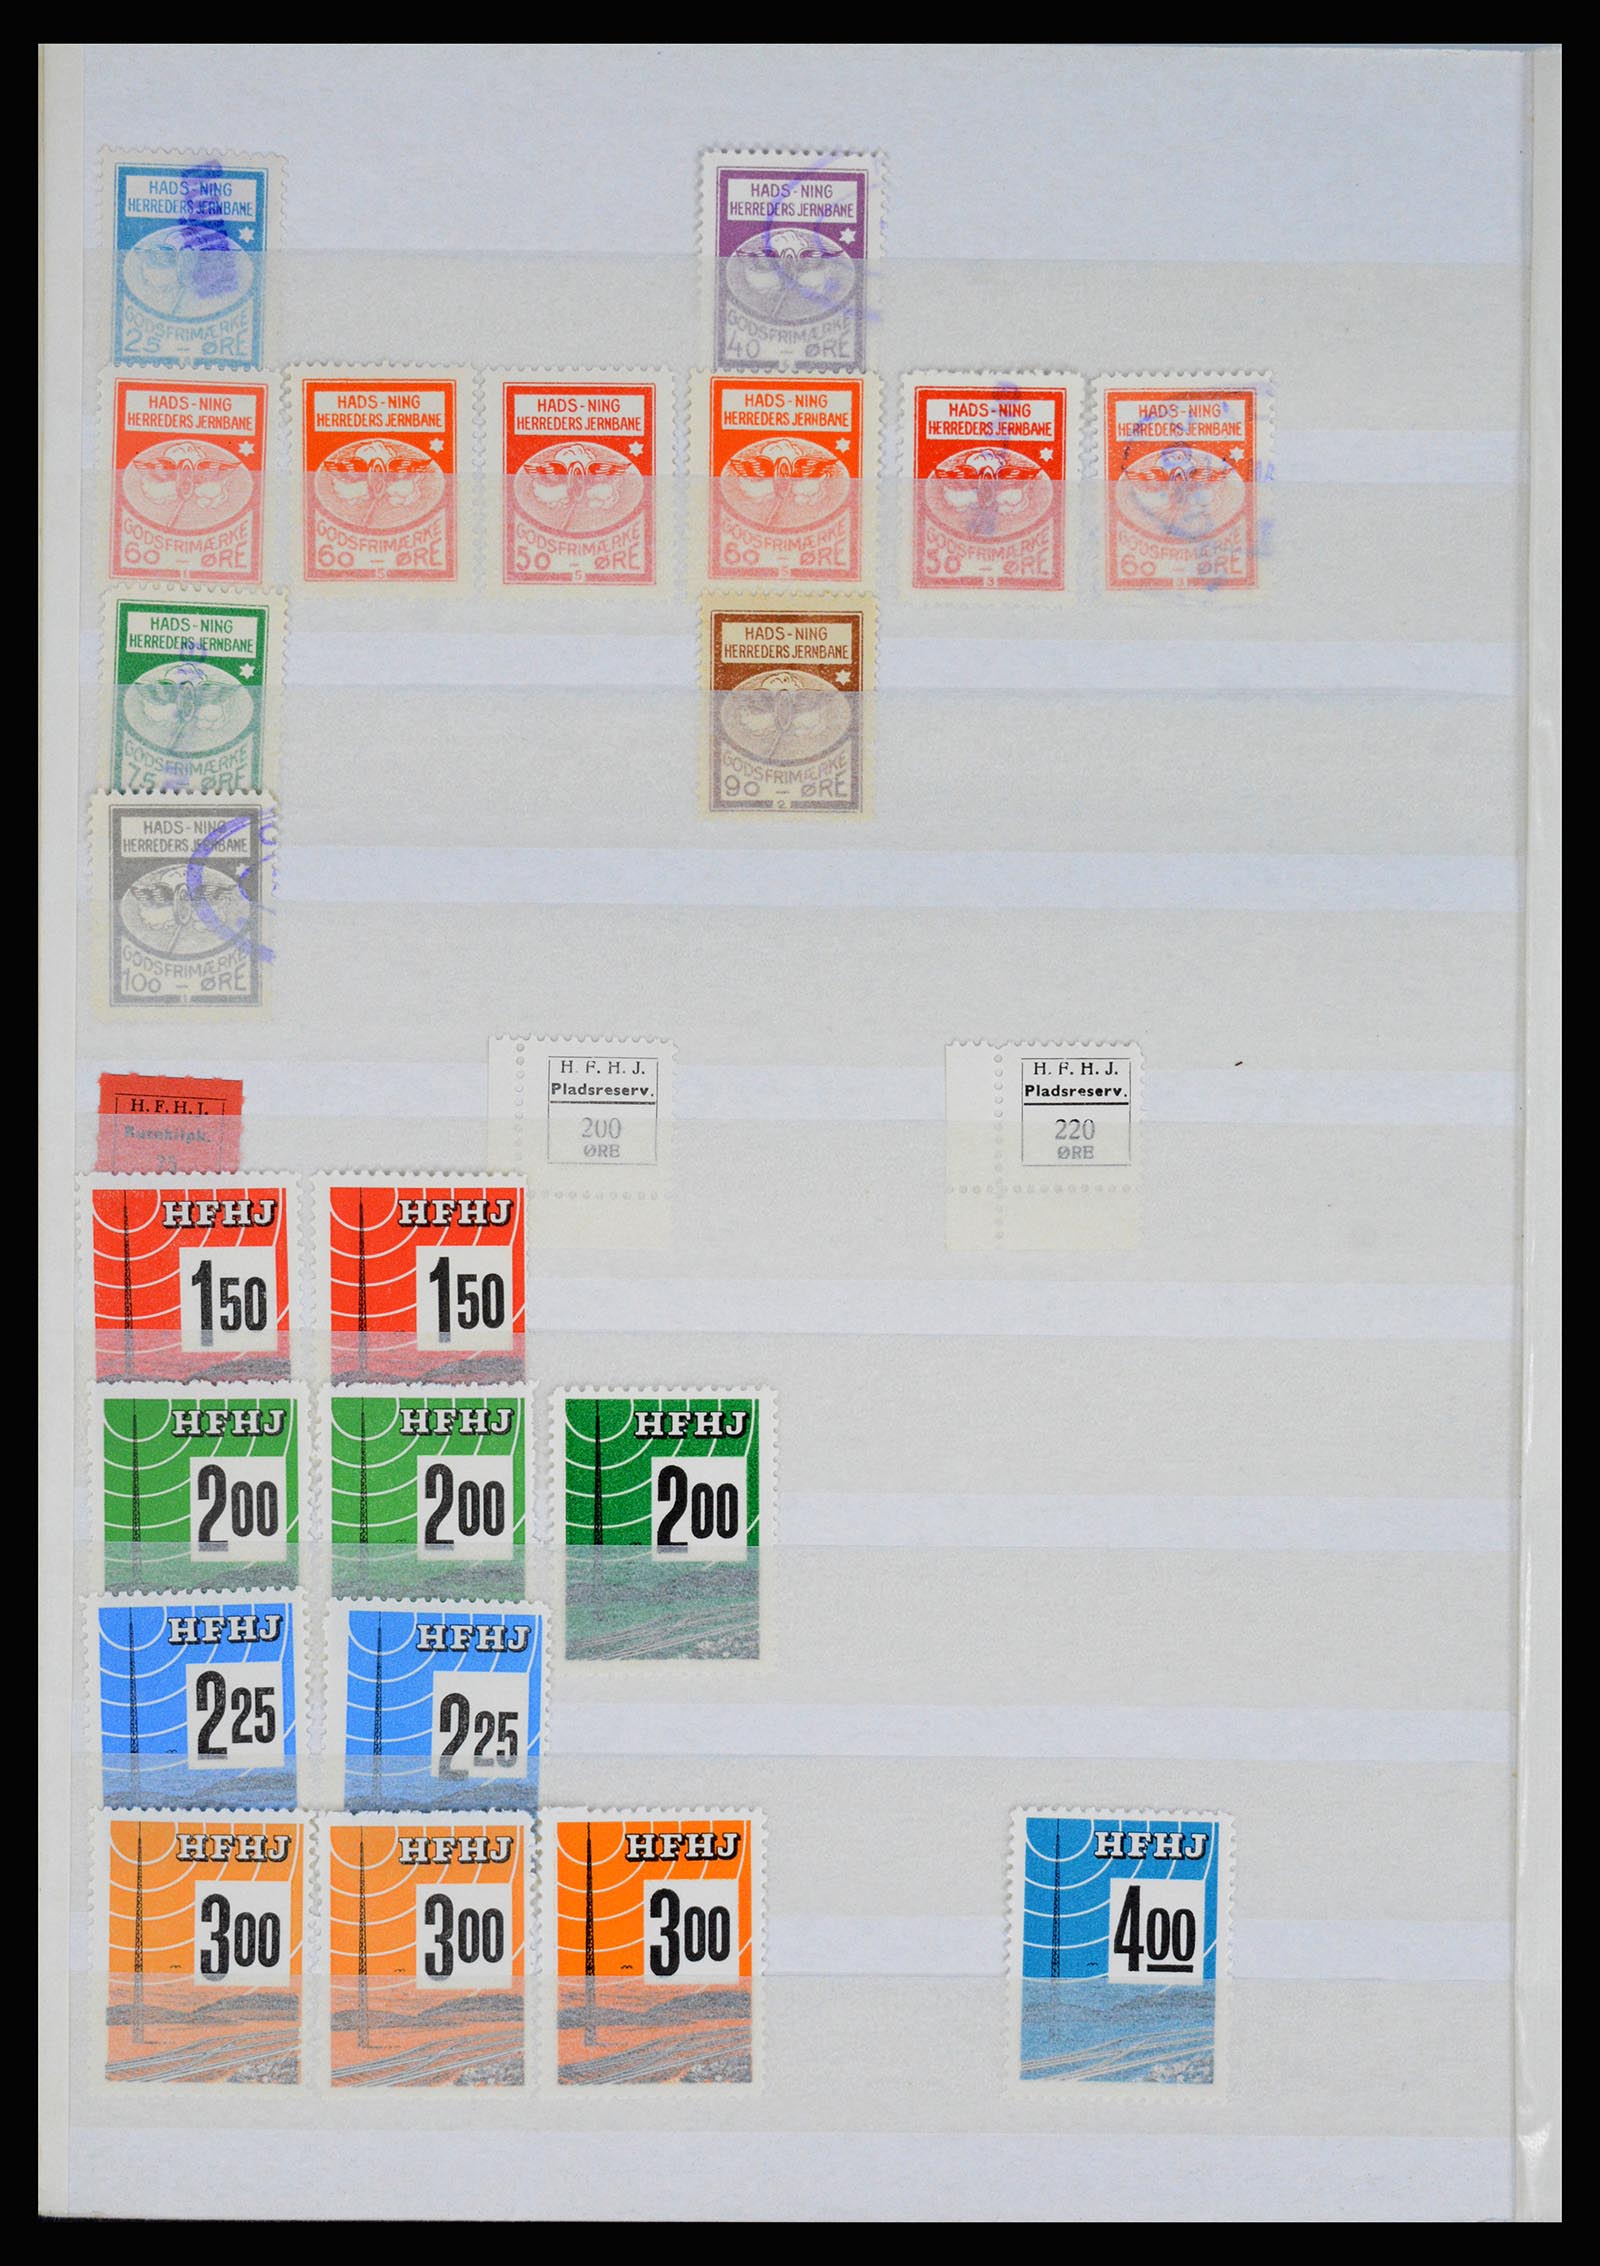 36982 024 - Stamp collection 36982 Denmark railroad stamps.